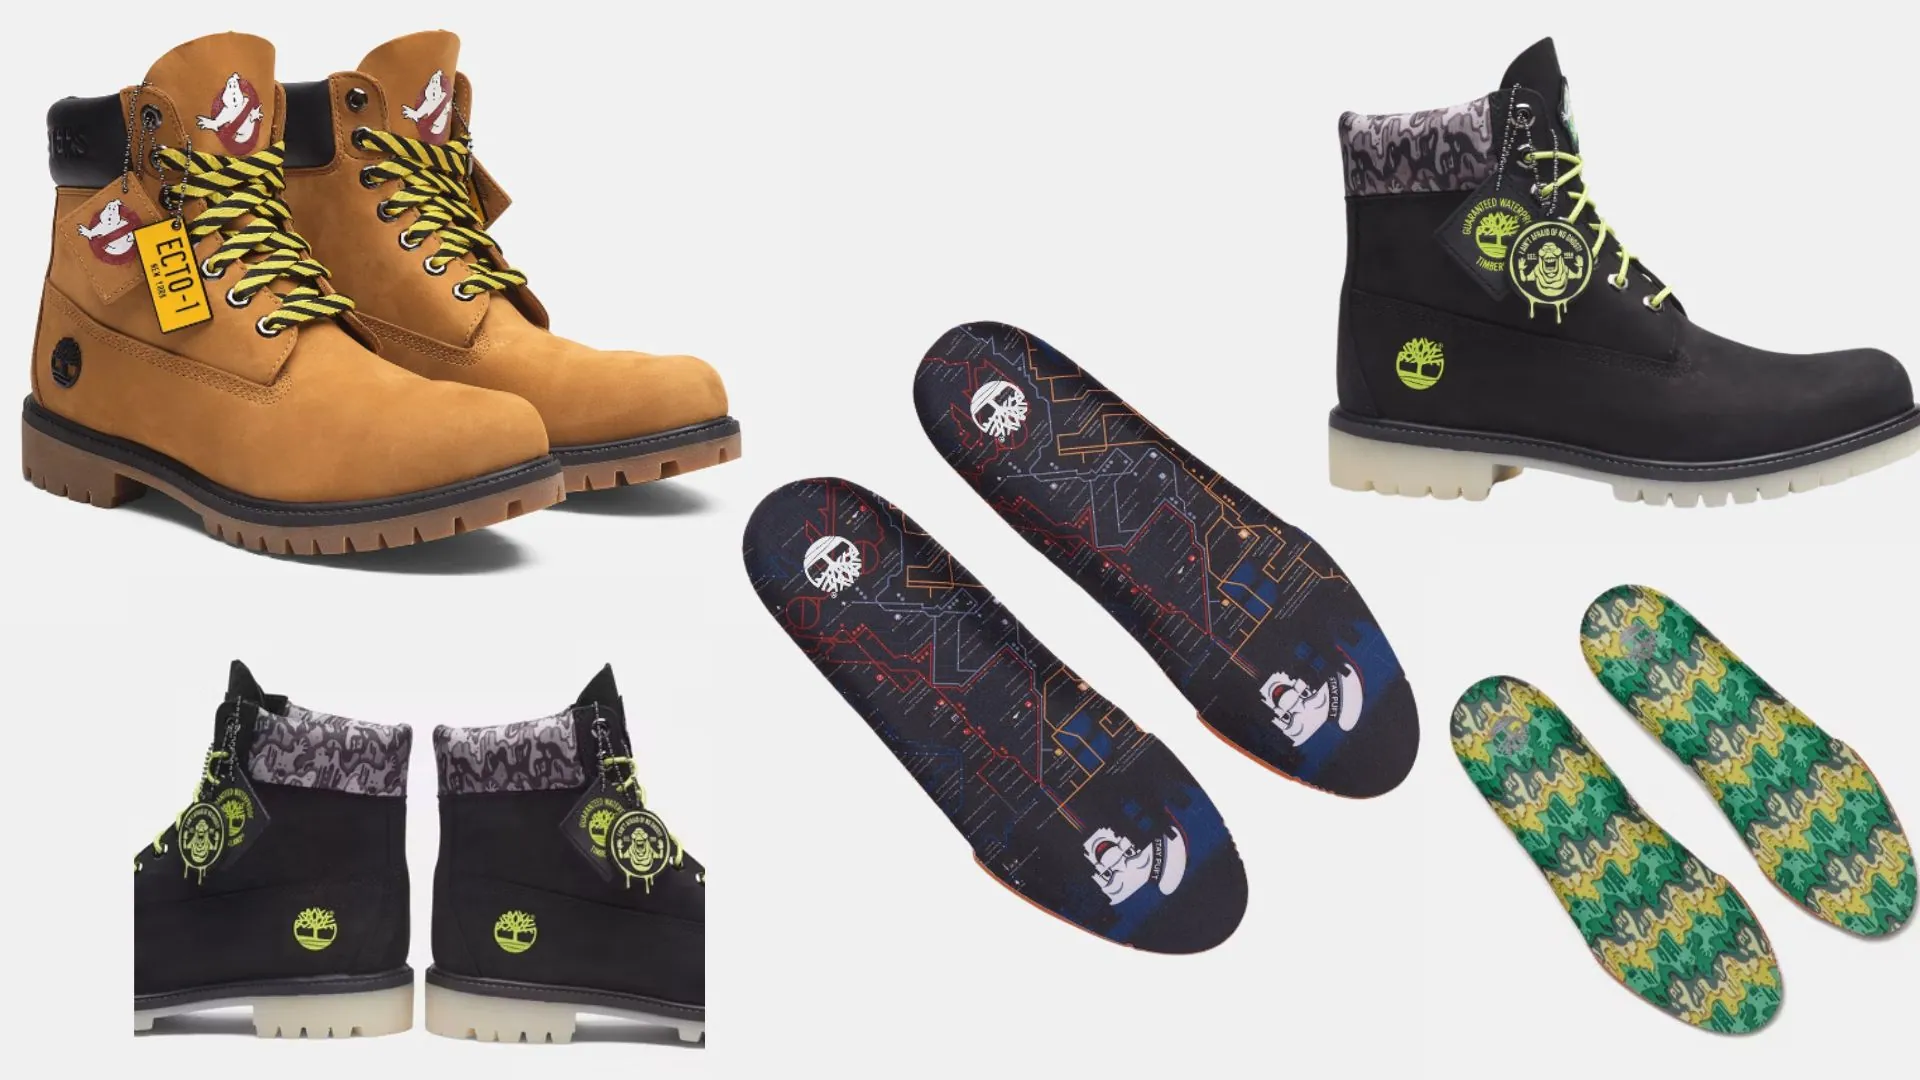 Boo There It Is Timberland Unveils Ghostbusters Boots for Frozen Empire Release